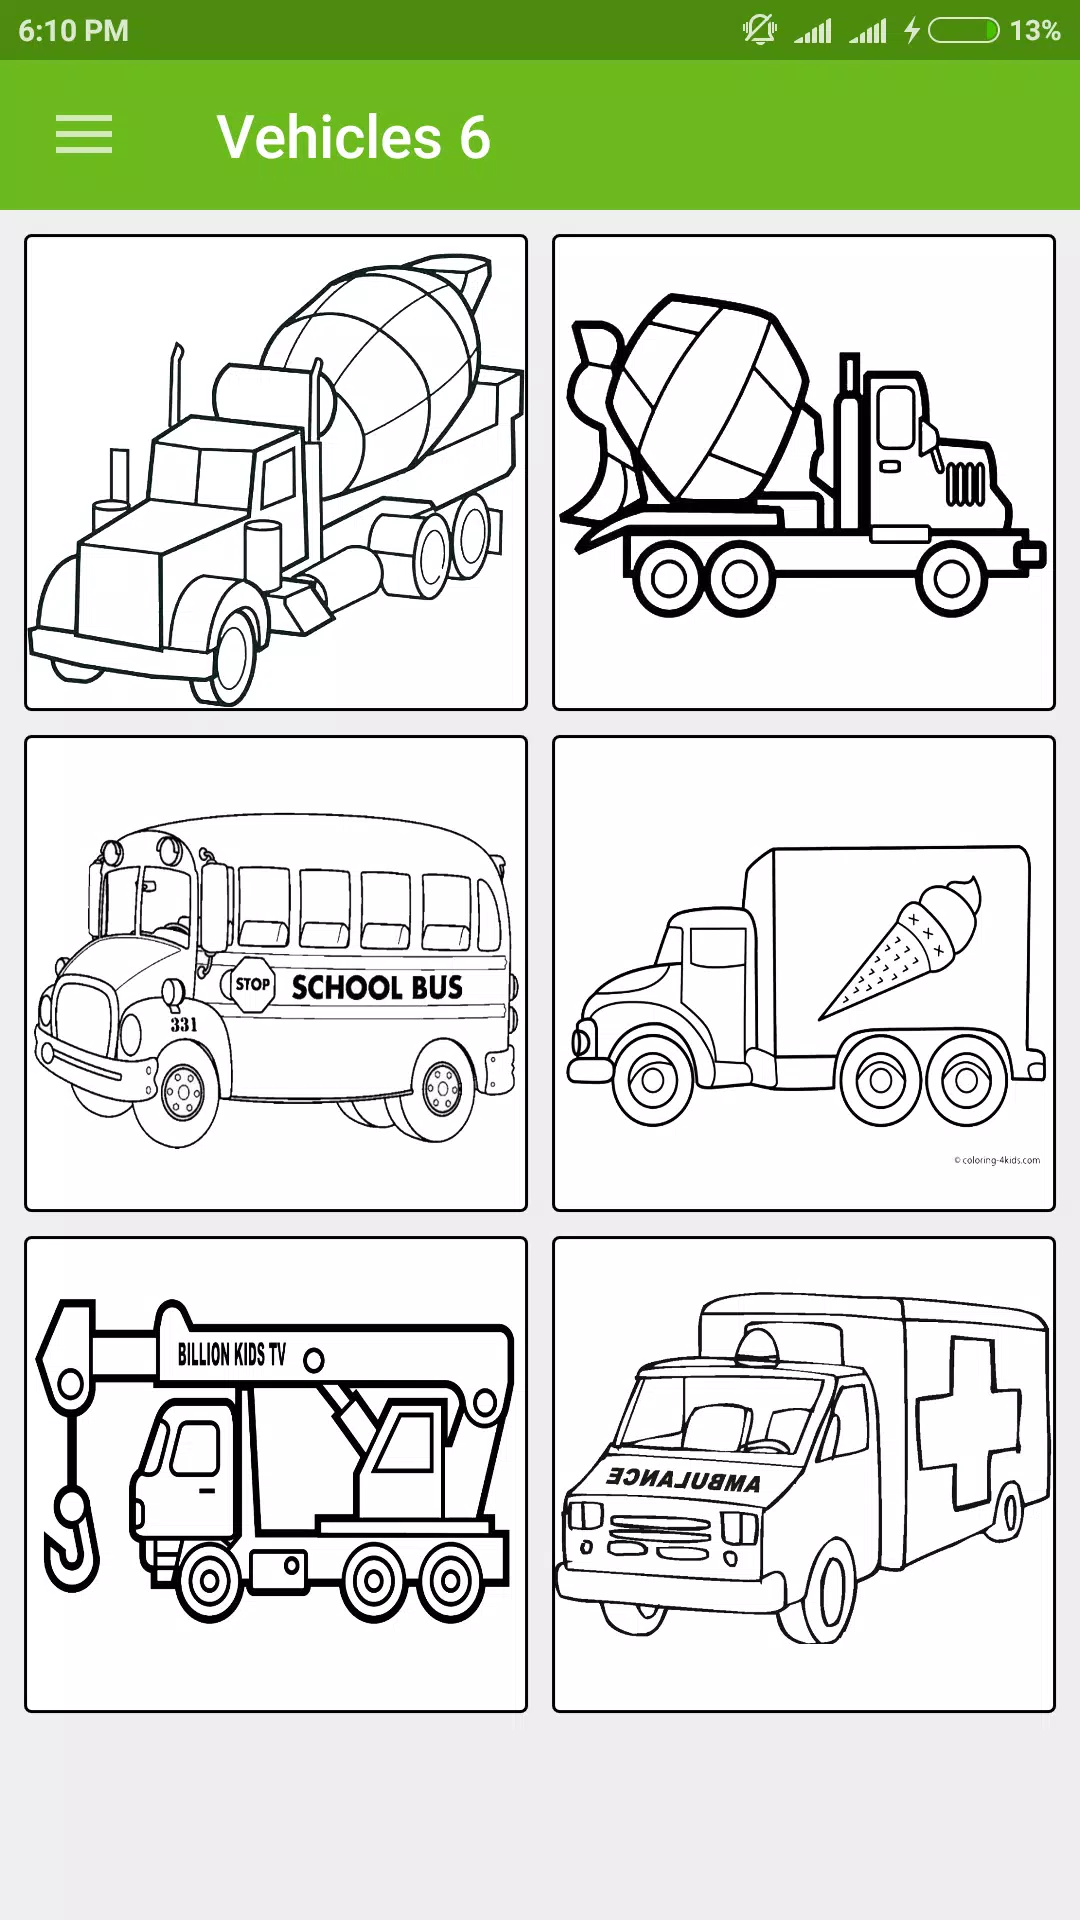 Vehicles Coloring Pages for Kids for Android   APK Download